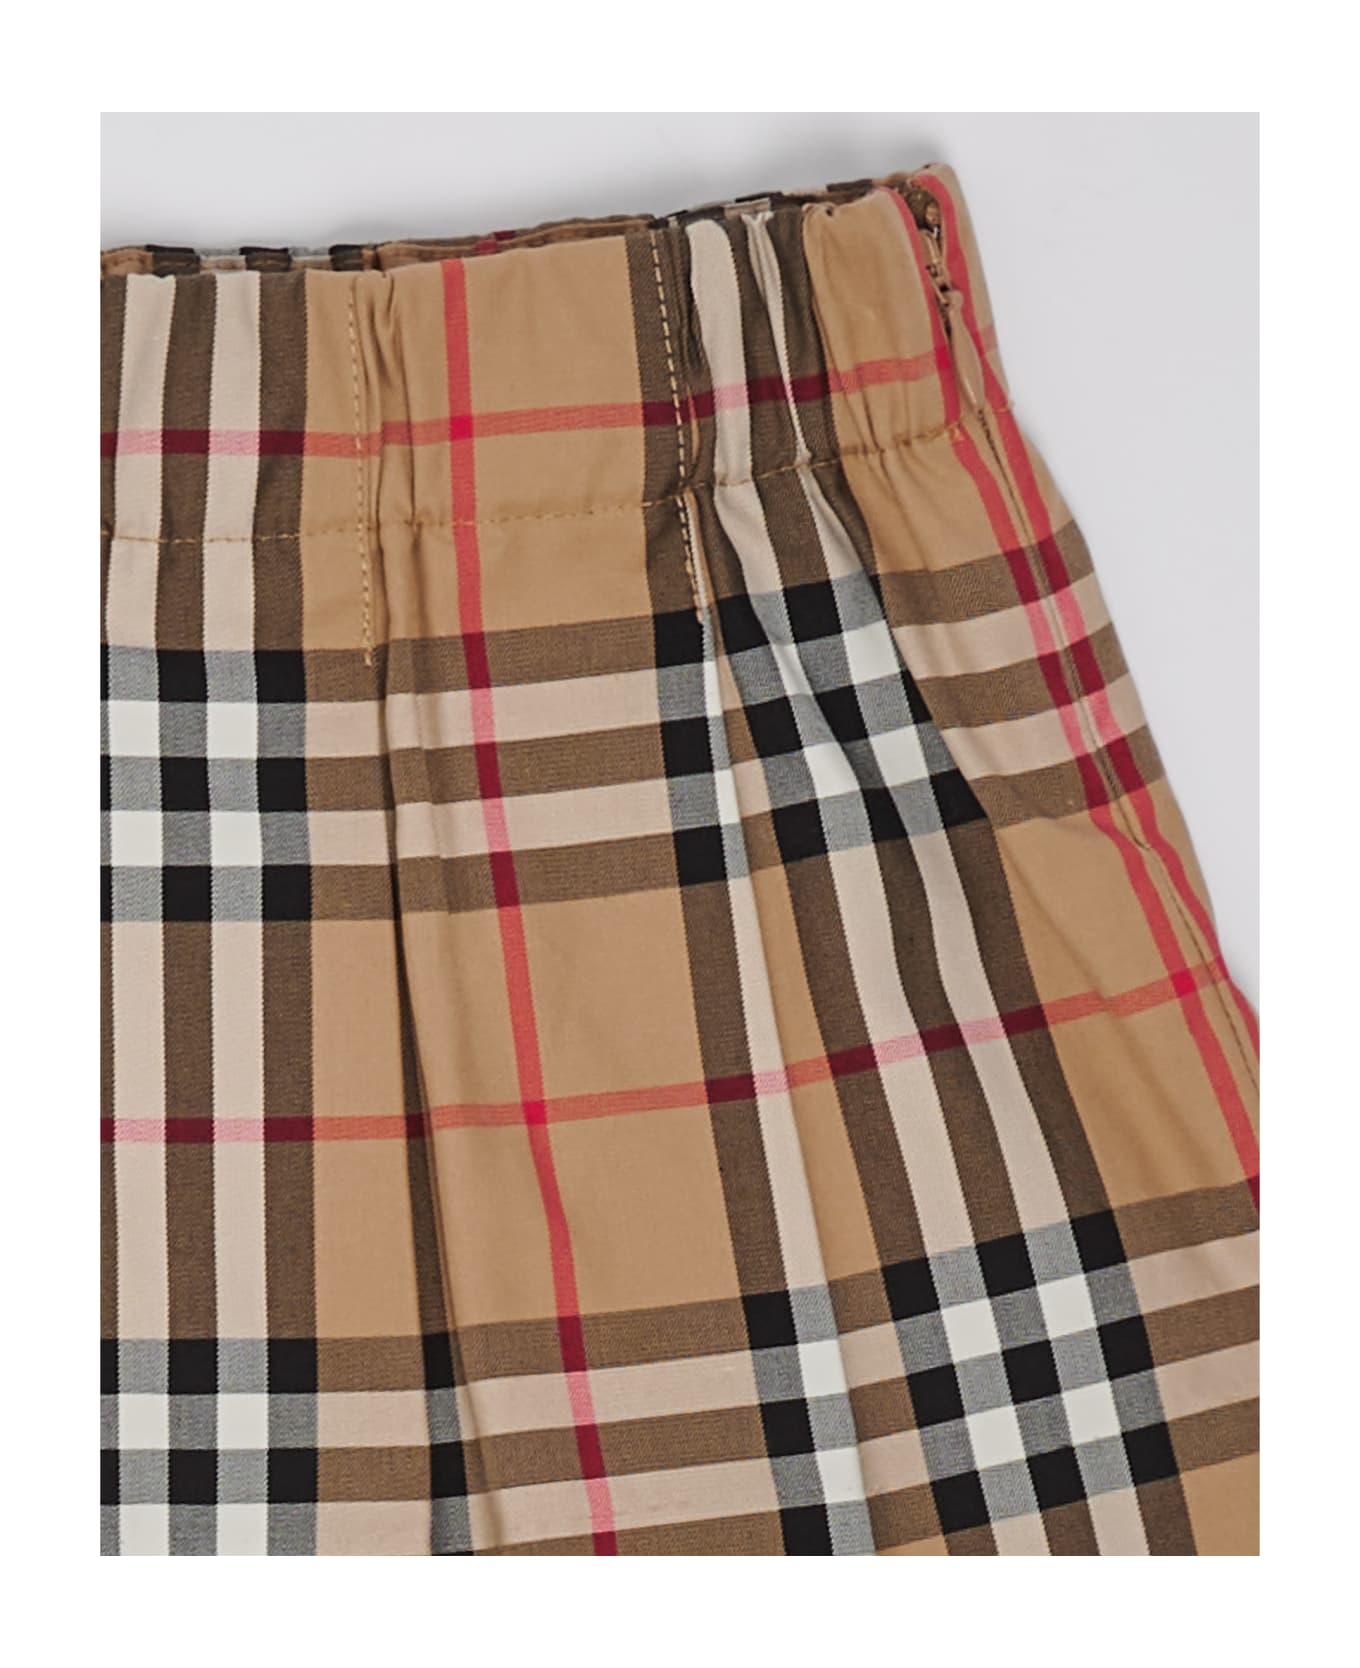 Burberry Gabrielle Skirt - CHECK BEIGE ボトムス